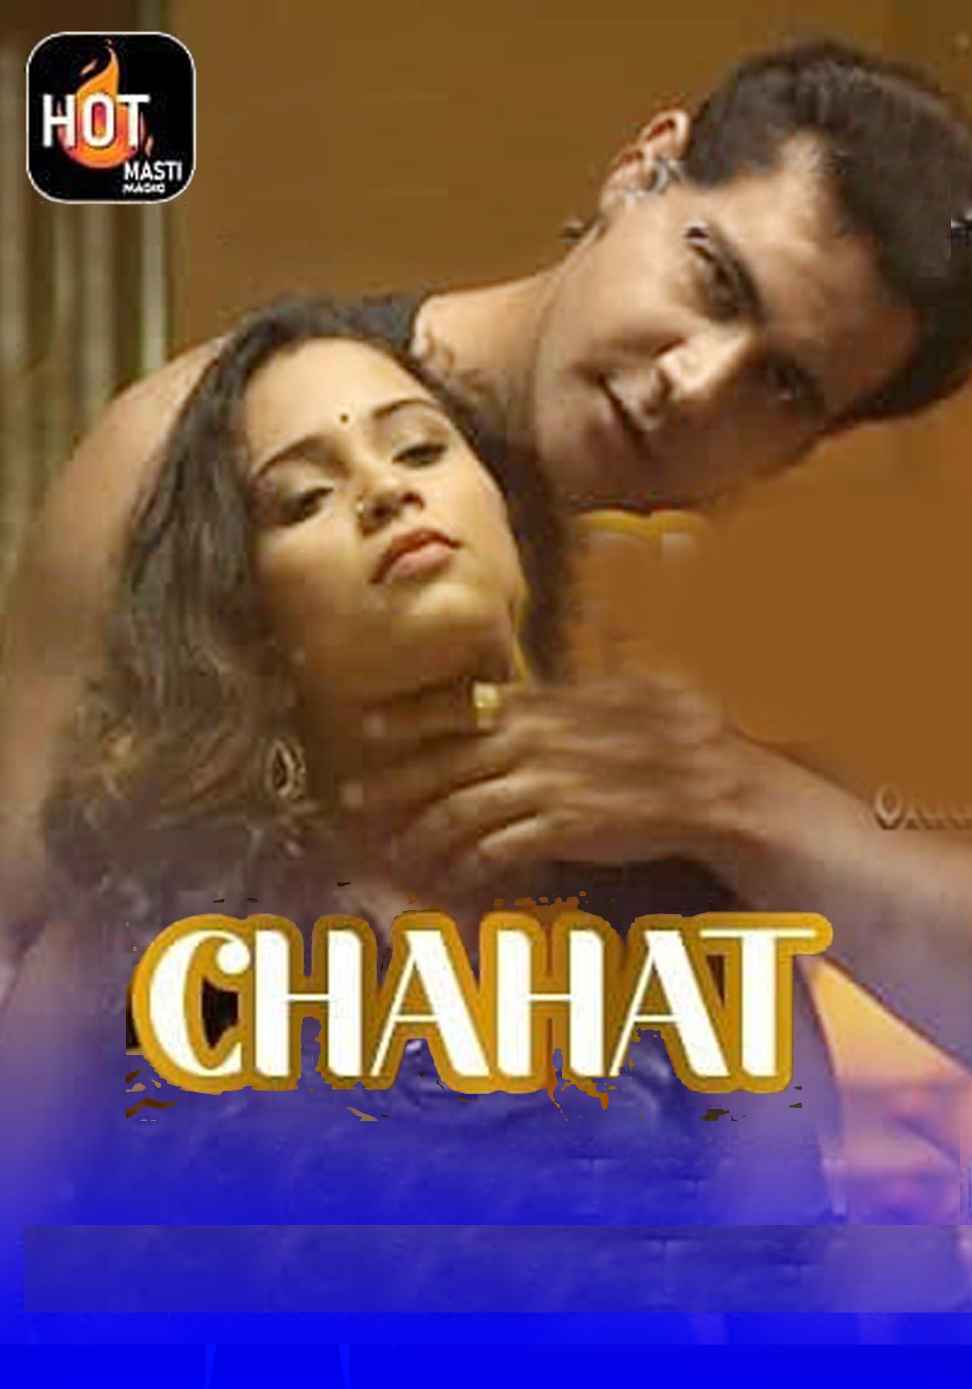 You are currently viewing Chahat 2021 HotMasti Hindi S01E02 Hot Web Series 720p HDRip 150MB Download & Watch Online